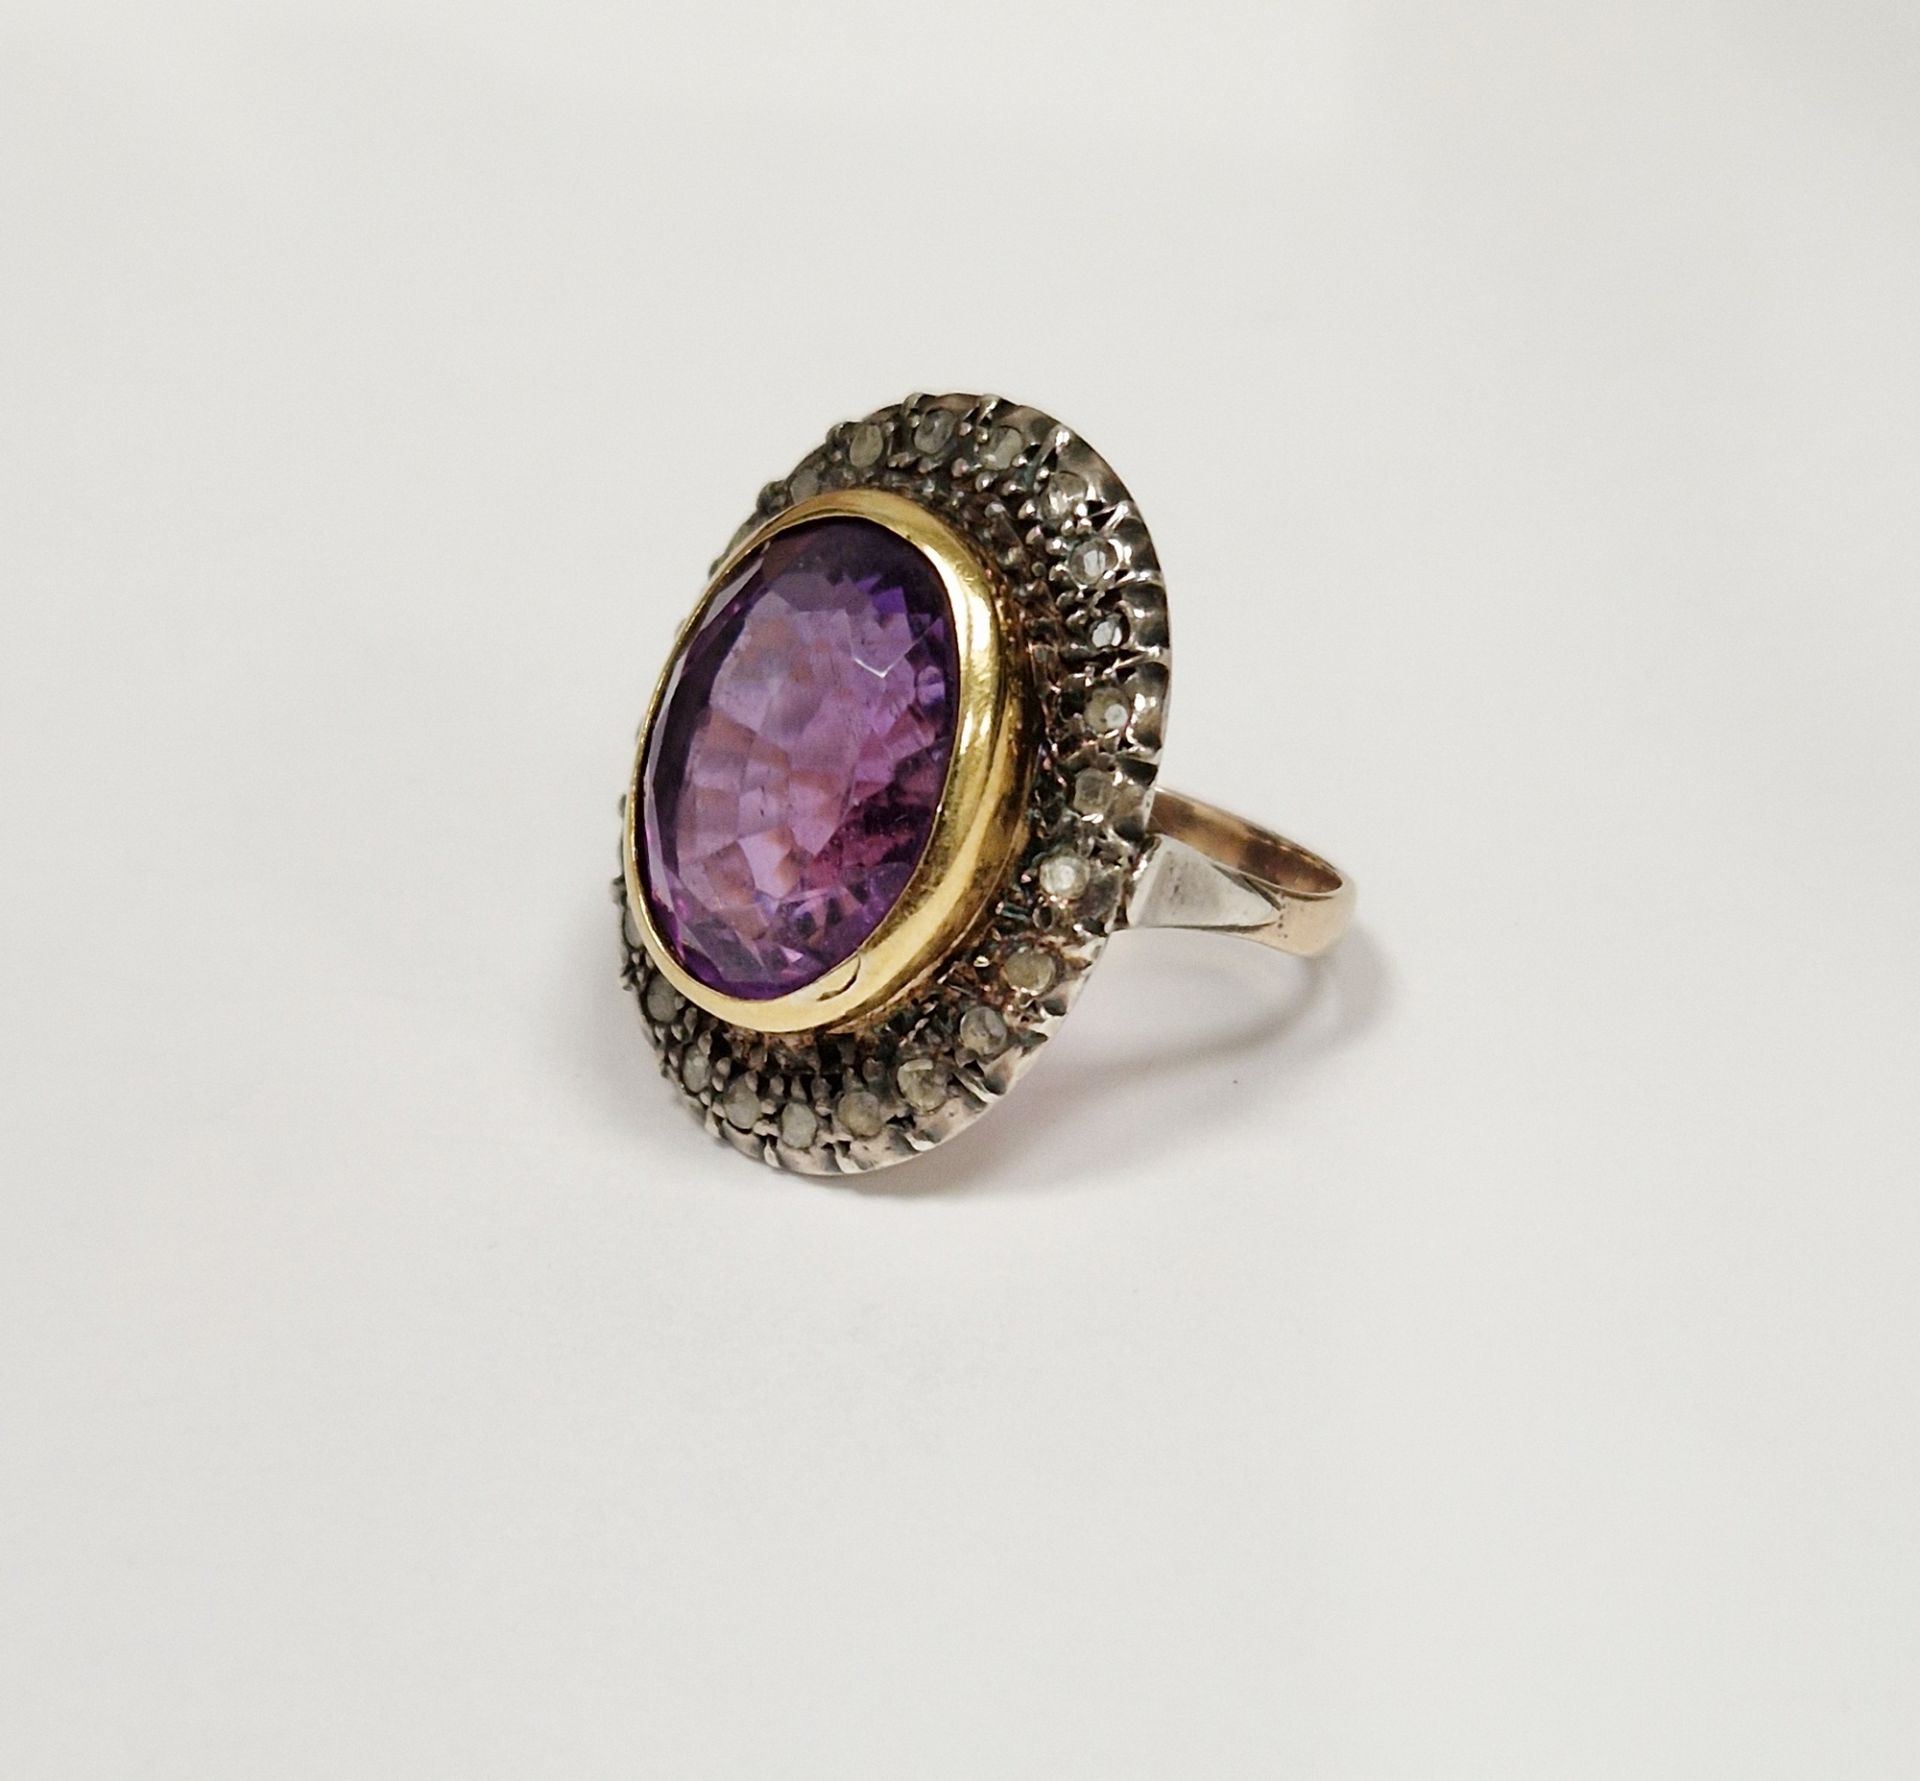 Diamond and amethyst stone dress ring set large oval cut amethyst surrounded by rough/old cut